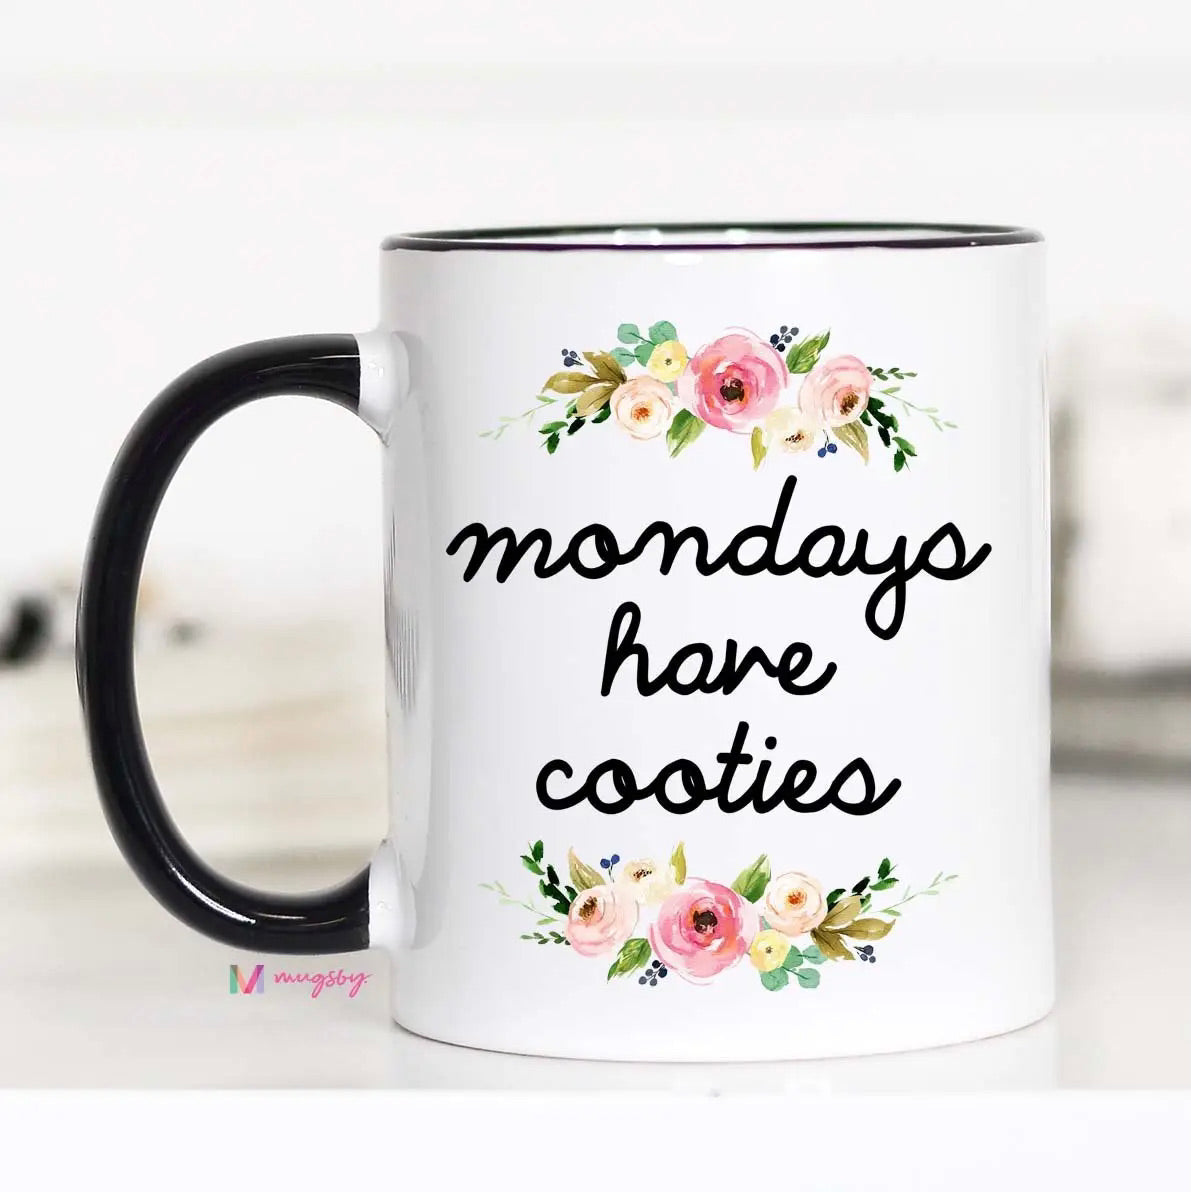 Monday's Have Cooties